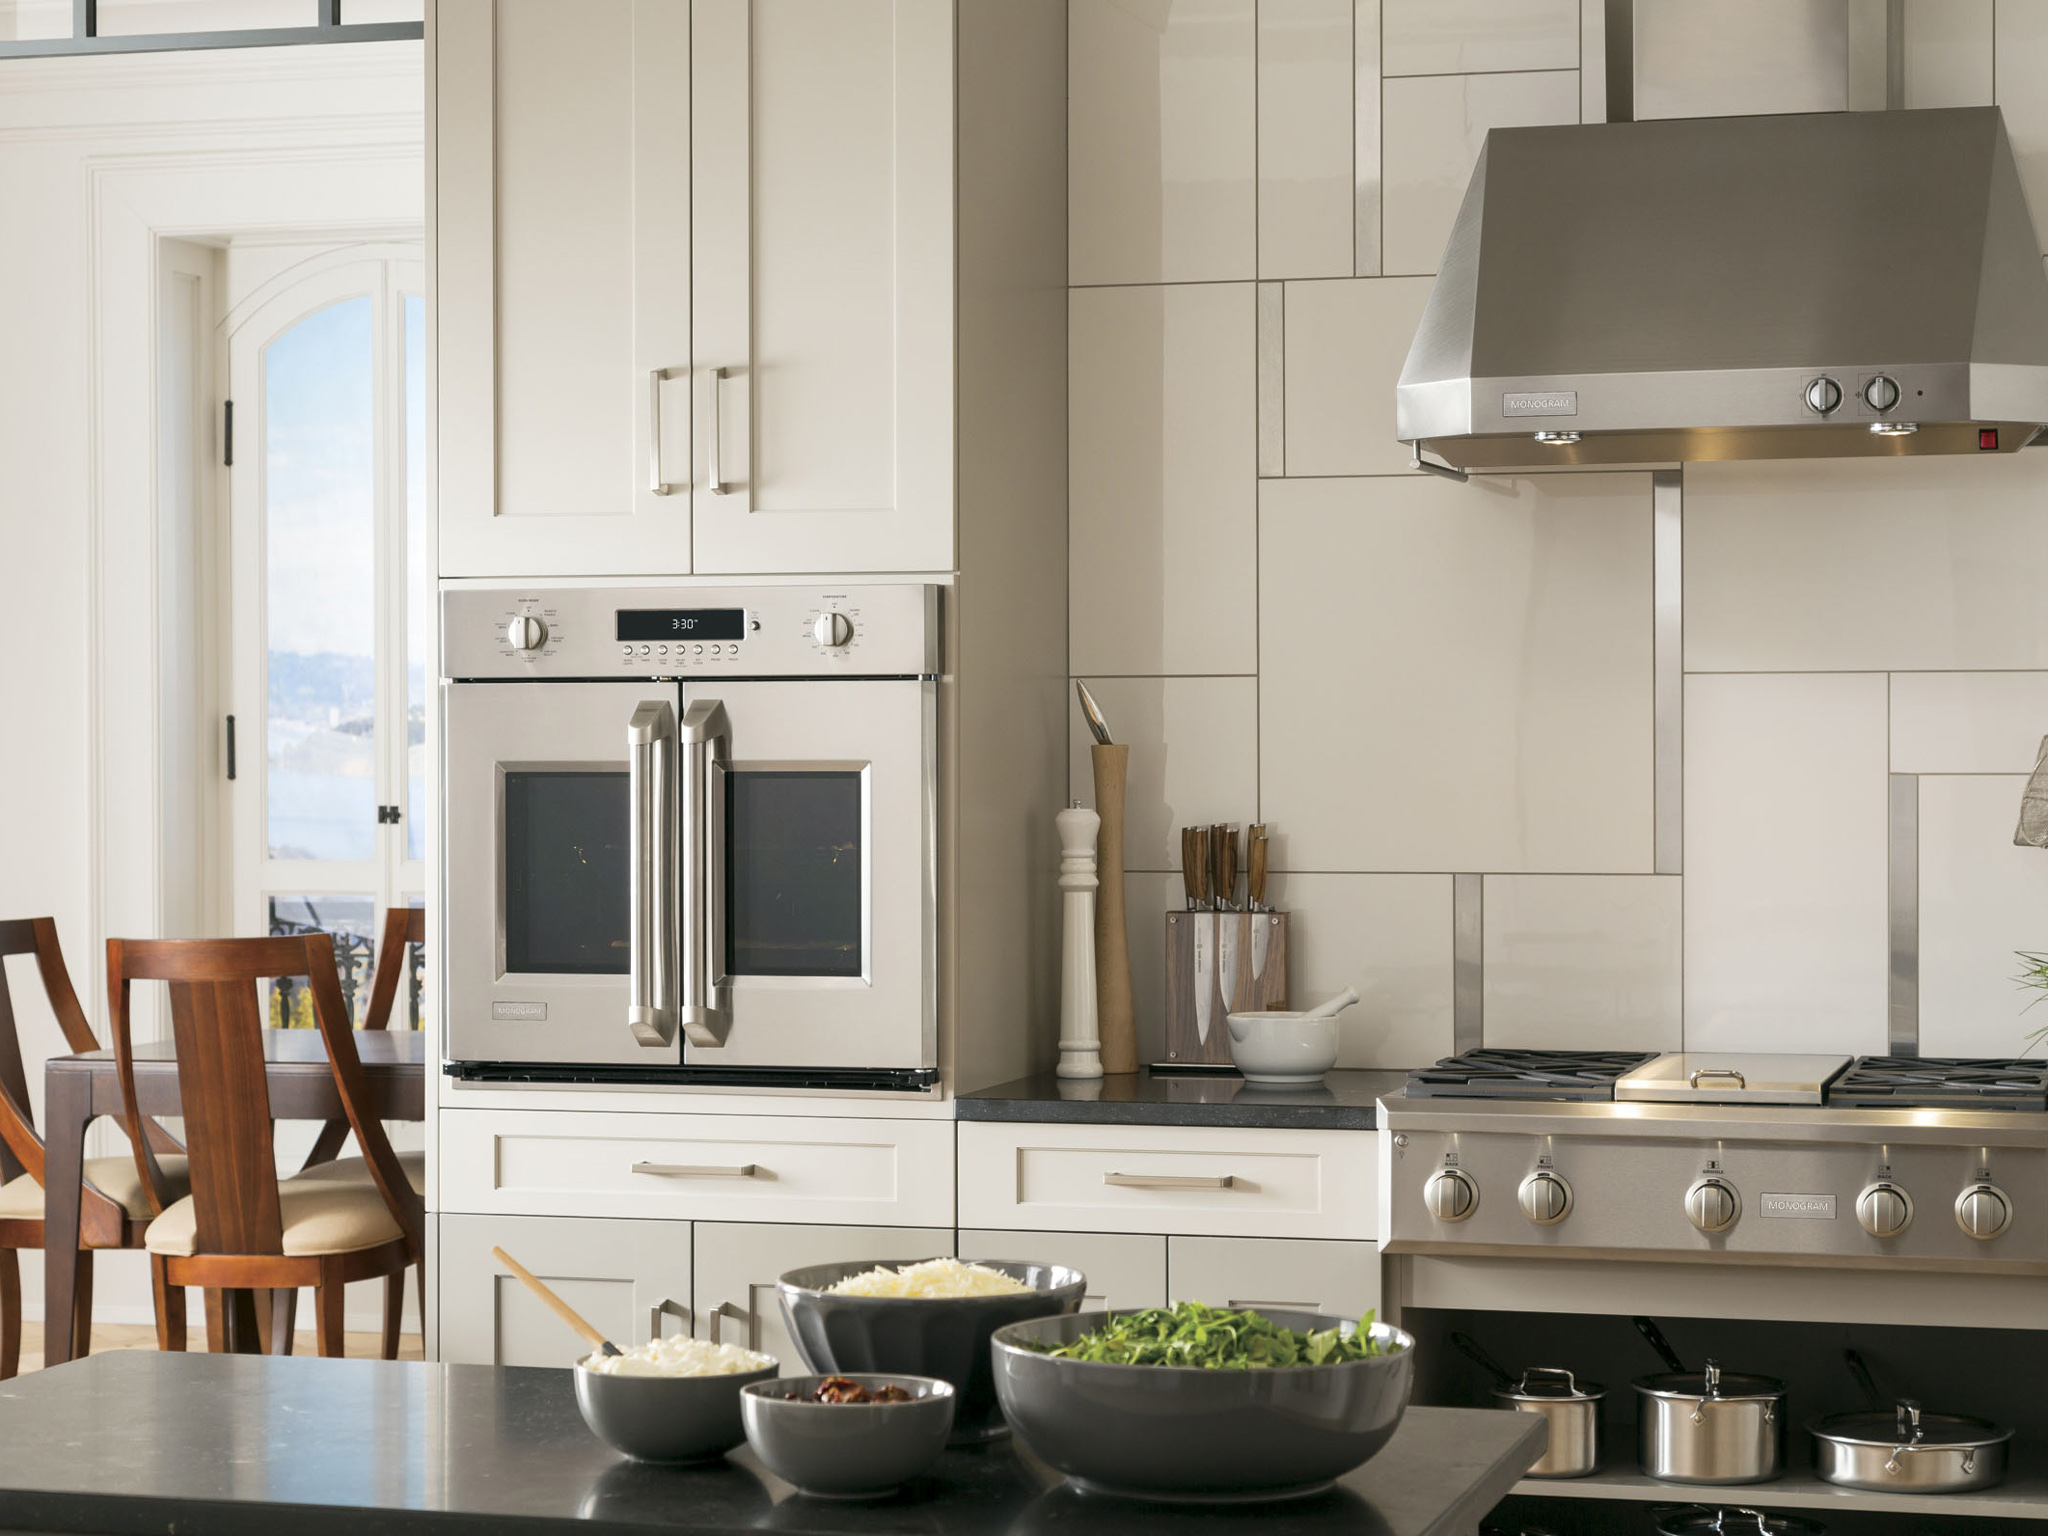 Tips To Buy Ovens From Home Products & Appliances